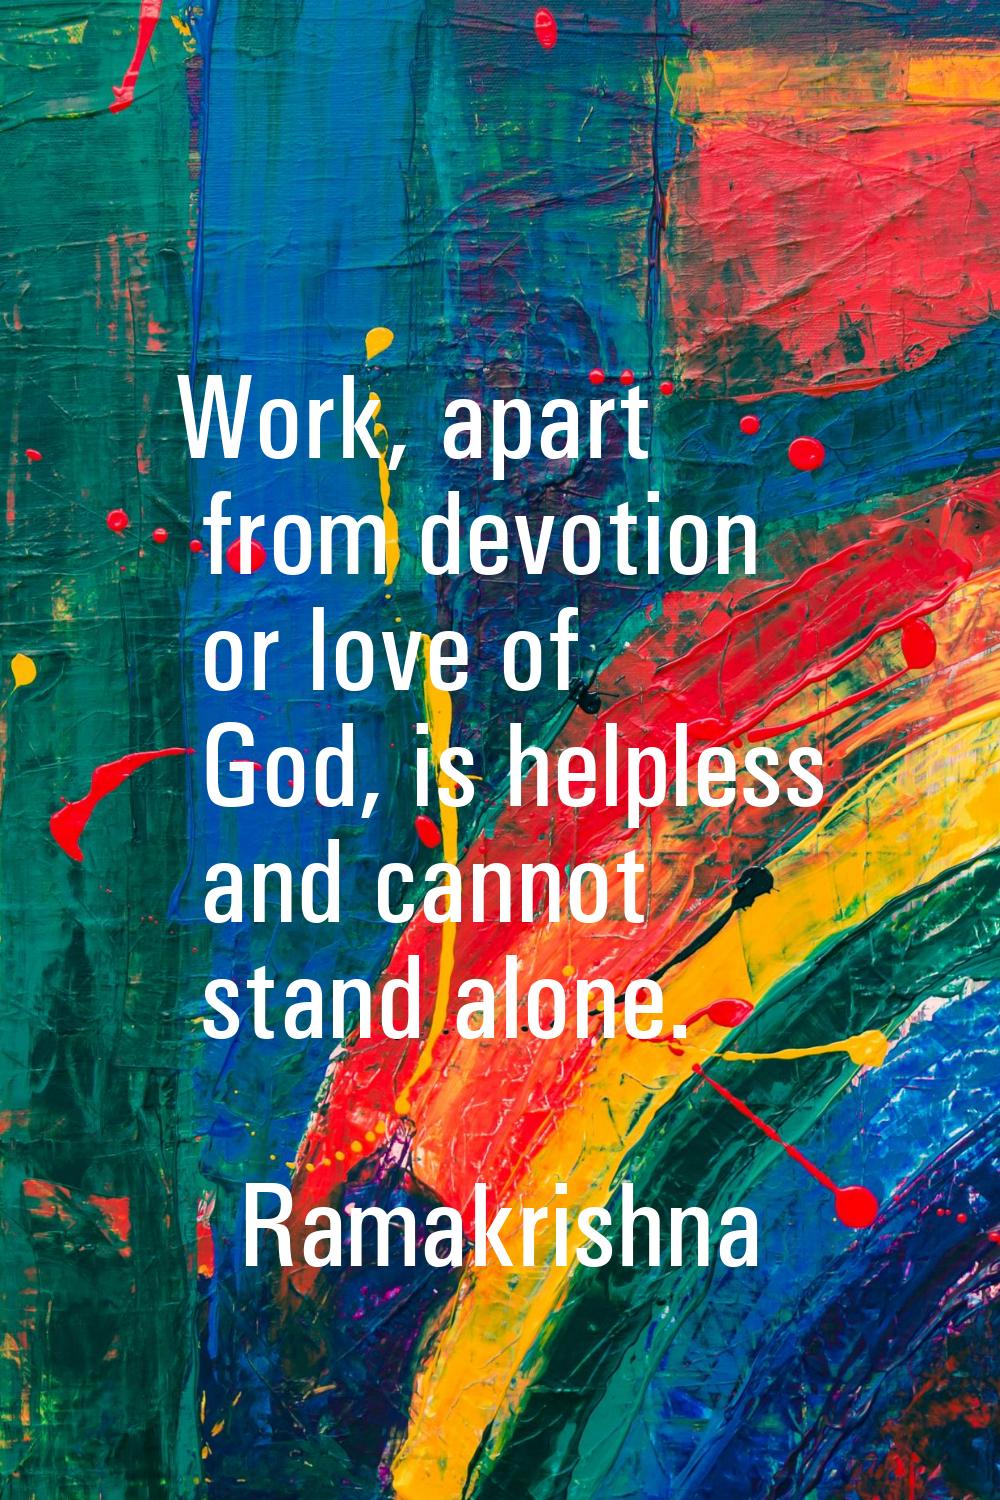 Work, apart from devotion or love of God, is helpless and cannot stand alone.